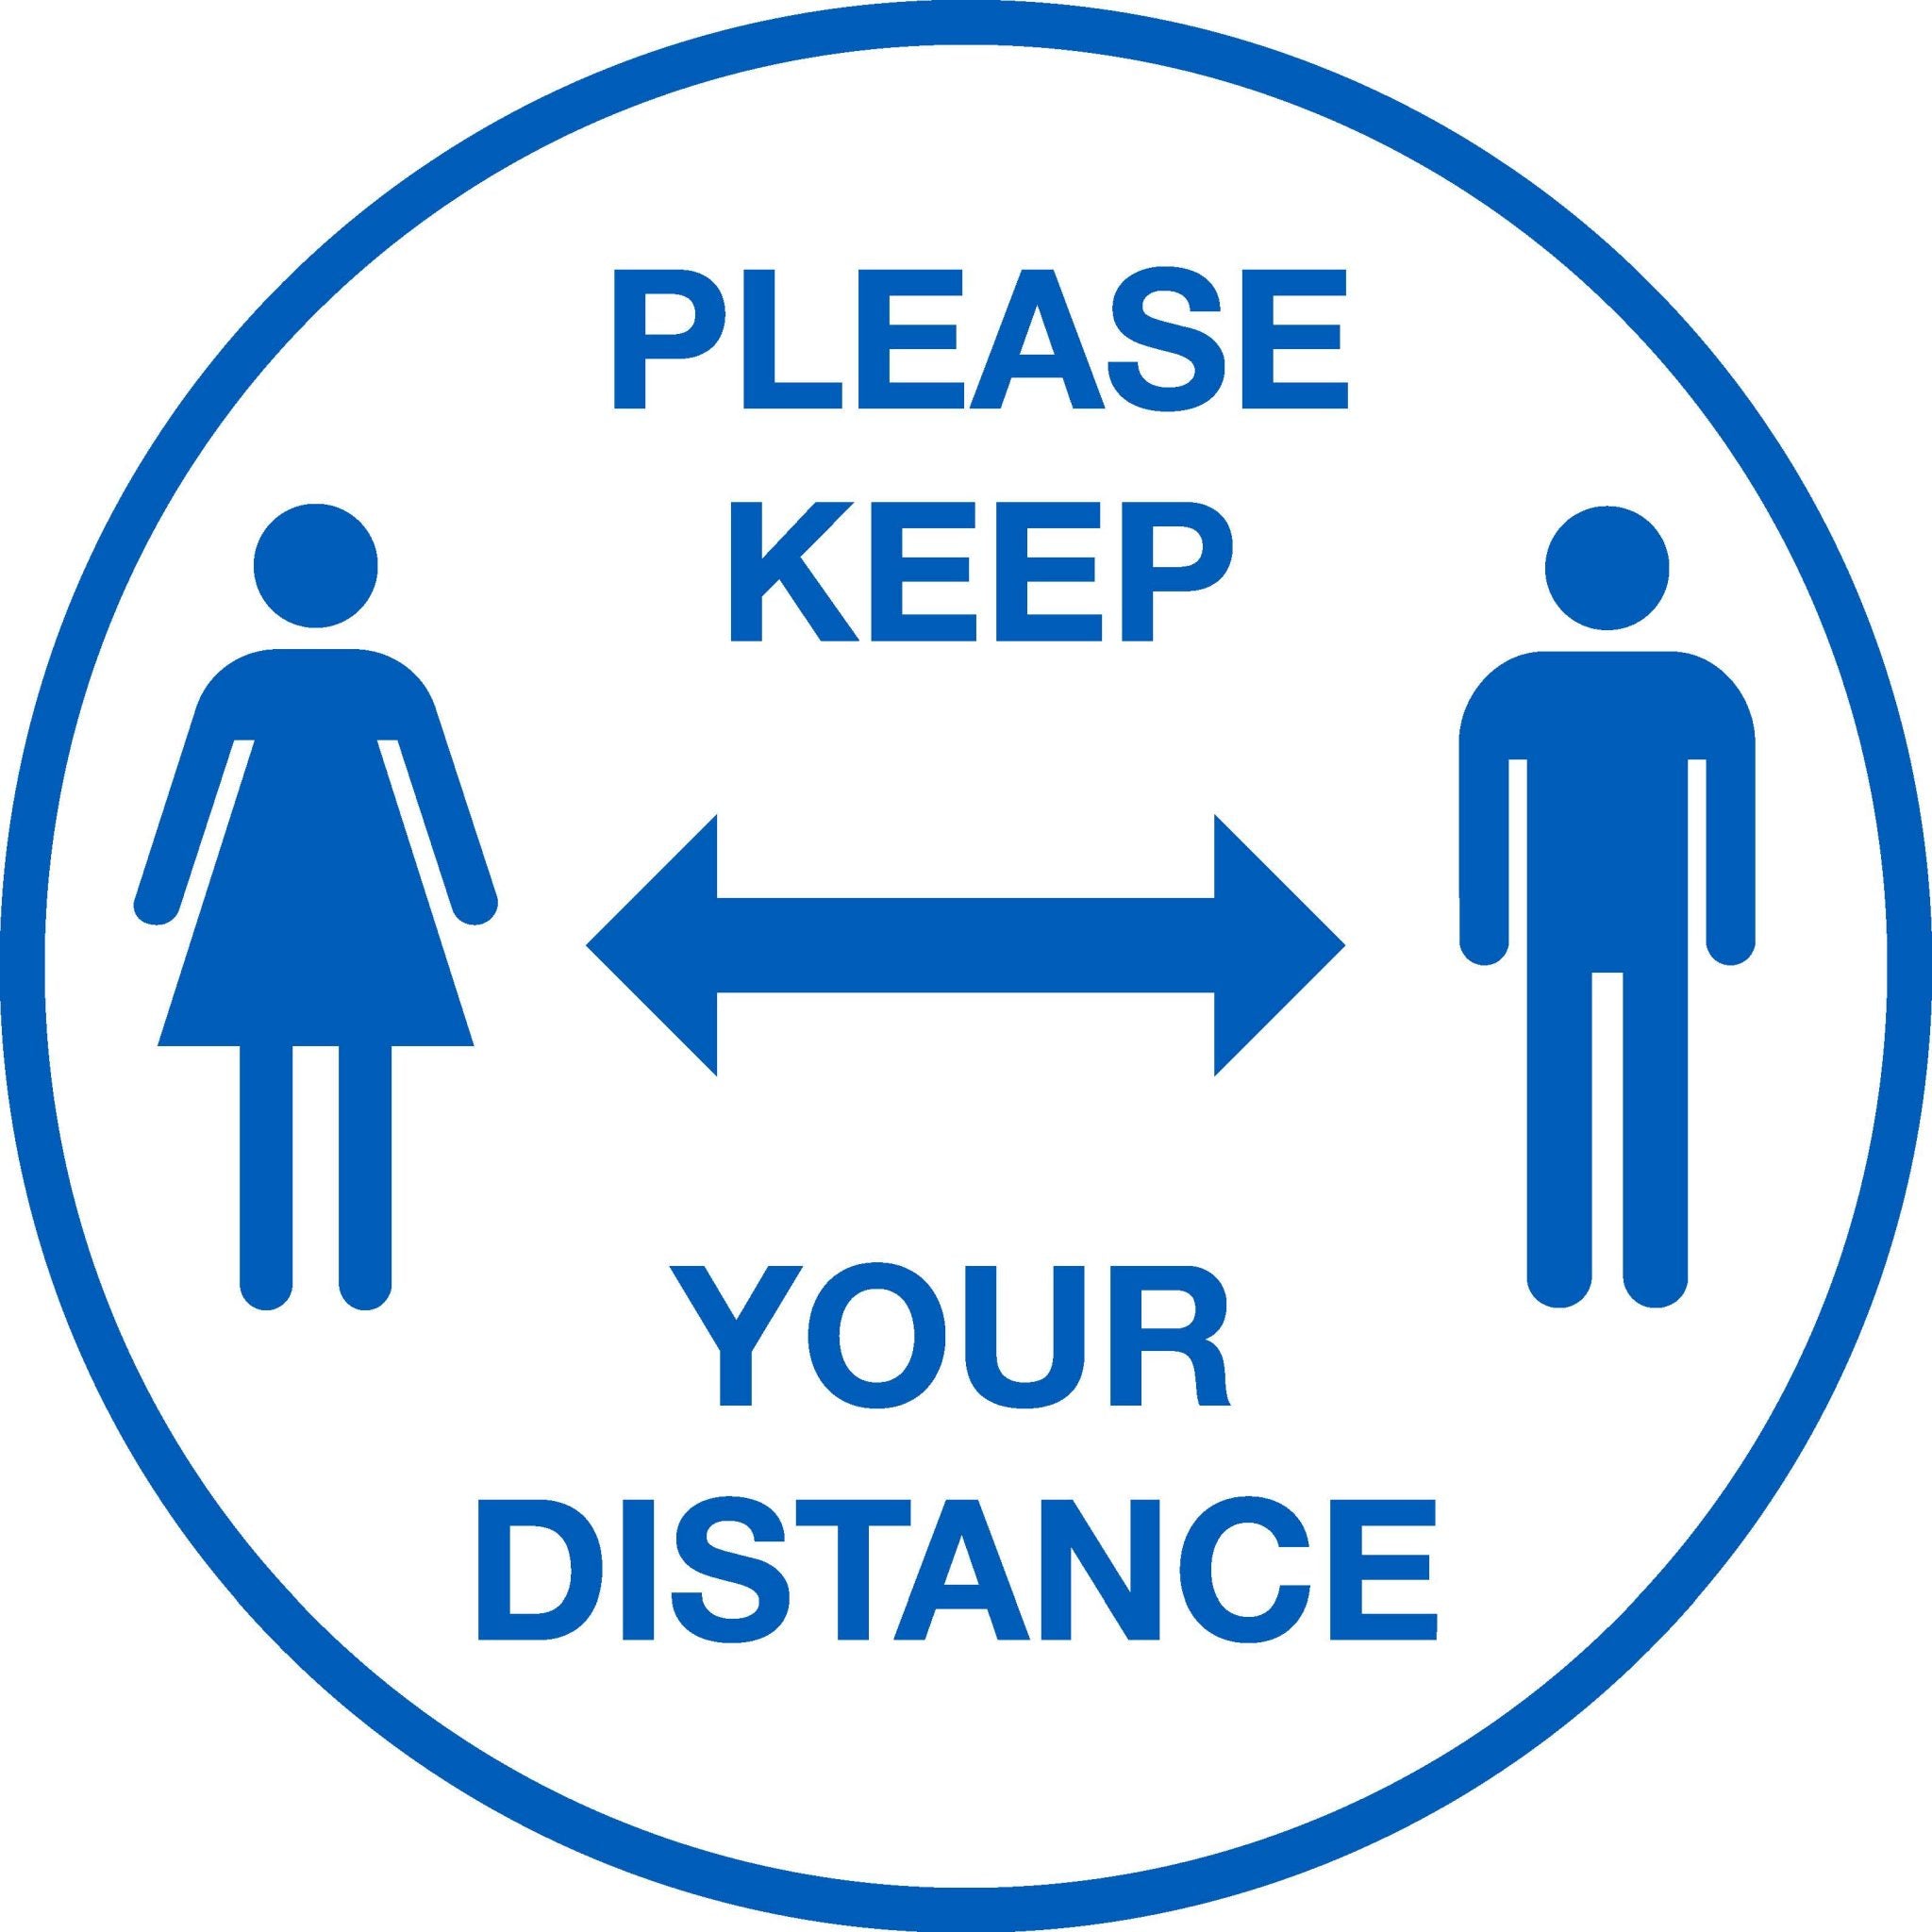 PLEASE KEEP YOUR DISTANCE - CYANvisuals